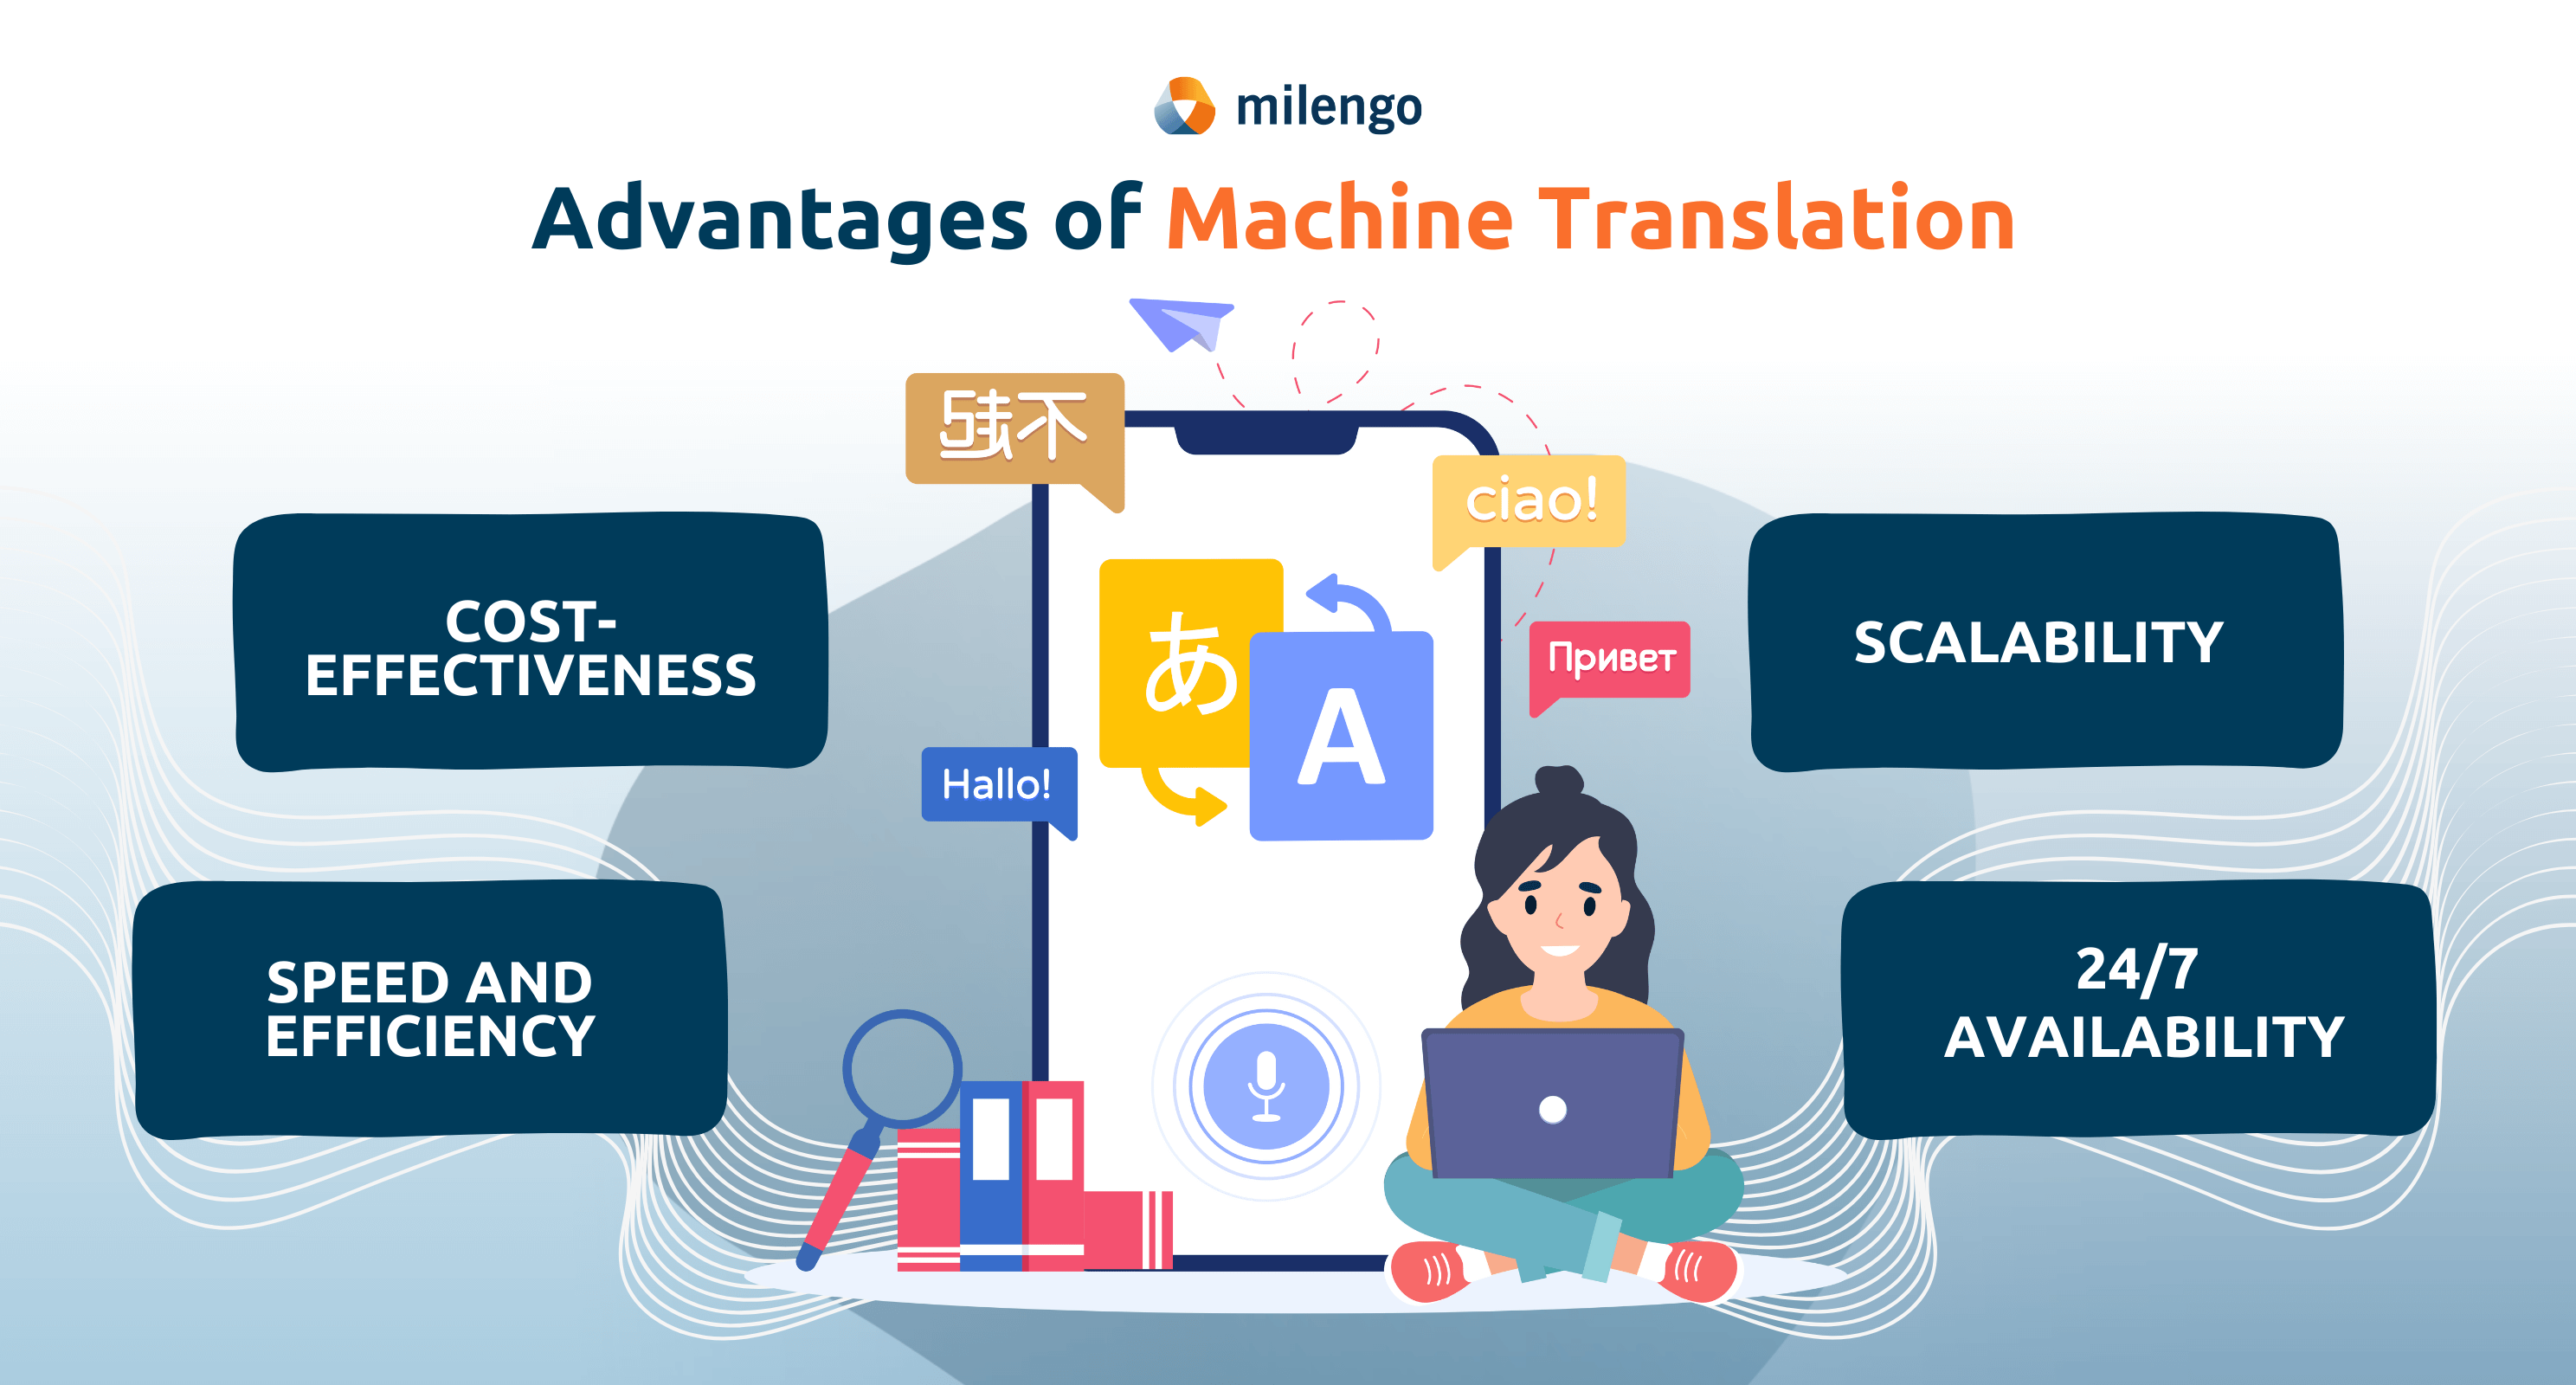 Advantages of Machine Translation: Speed and efficiency, cost-effectiveness, scalability, 24/7 availability